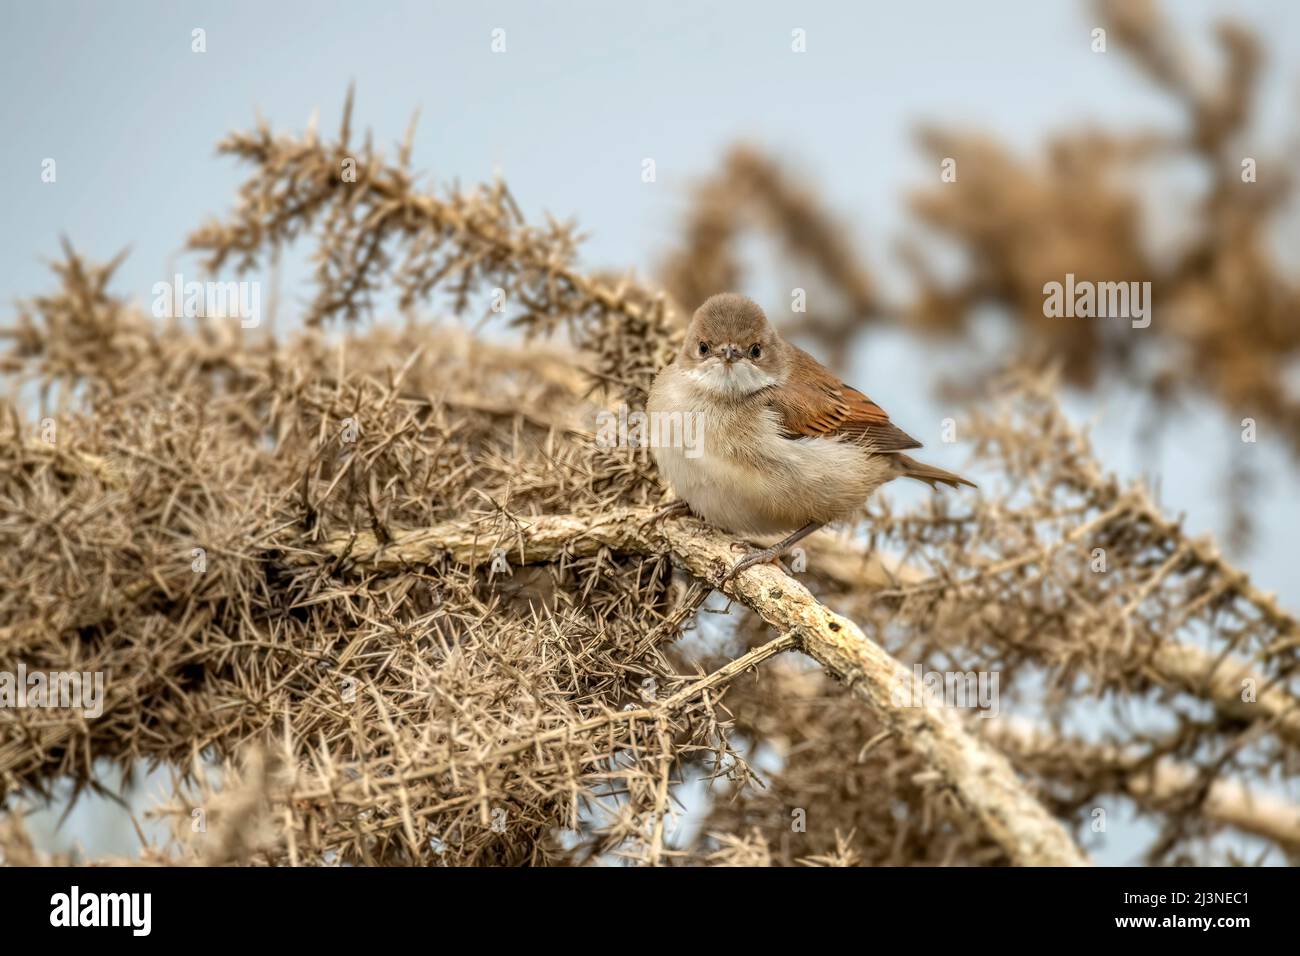 Whitethroat perched on a gorse plant, close up Stock Photo